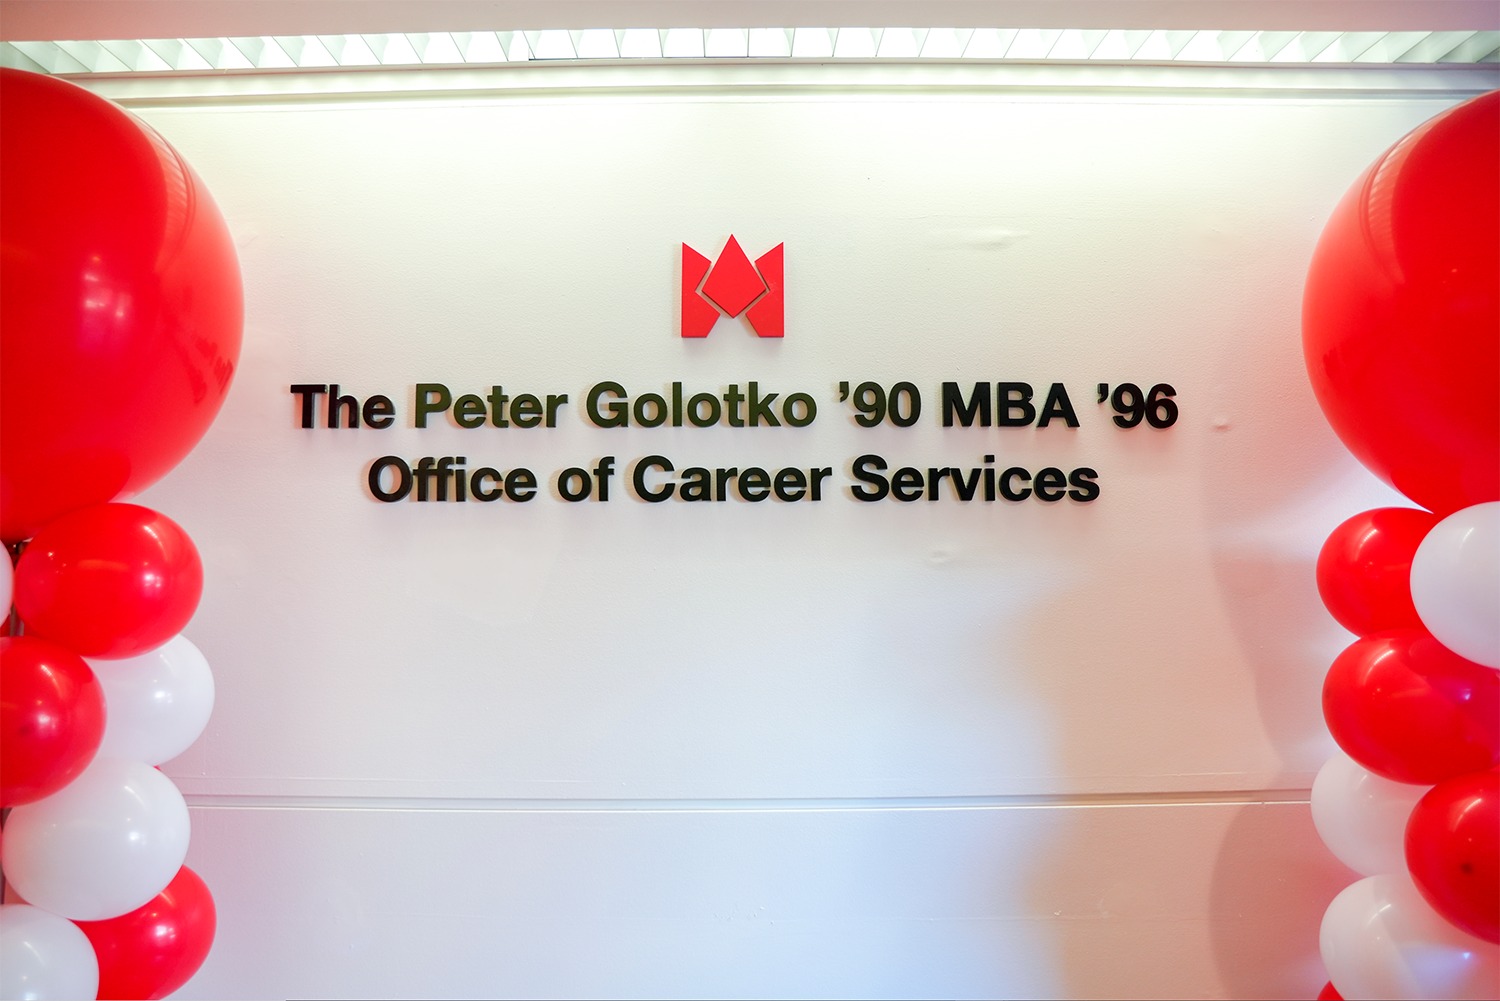 Peter C. Golotko '90 MBA '96 Office of Career Services